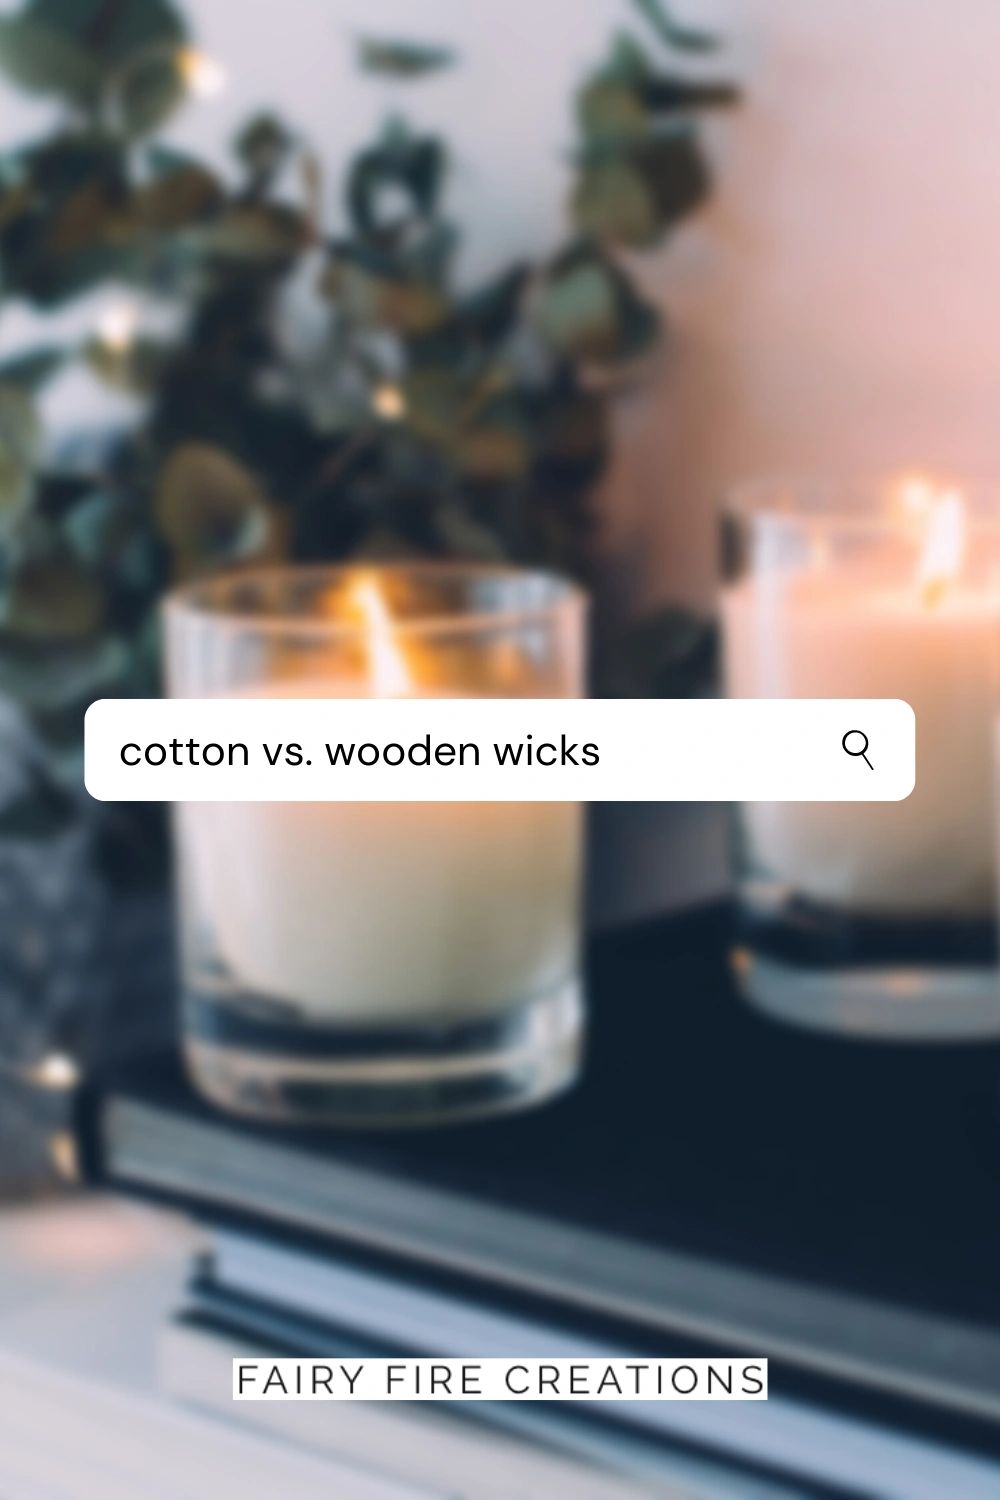 wood wicks vs cotton wicks 🤔 what's the difference? 